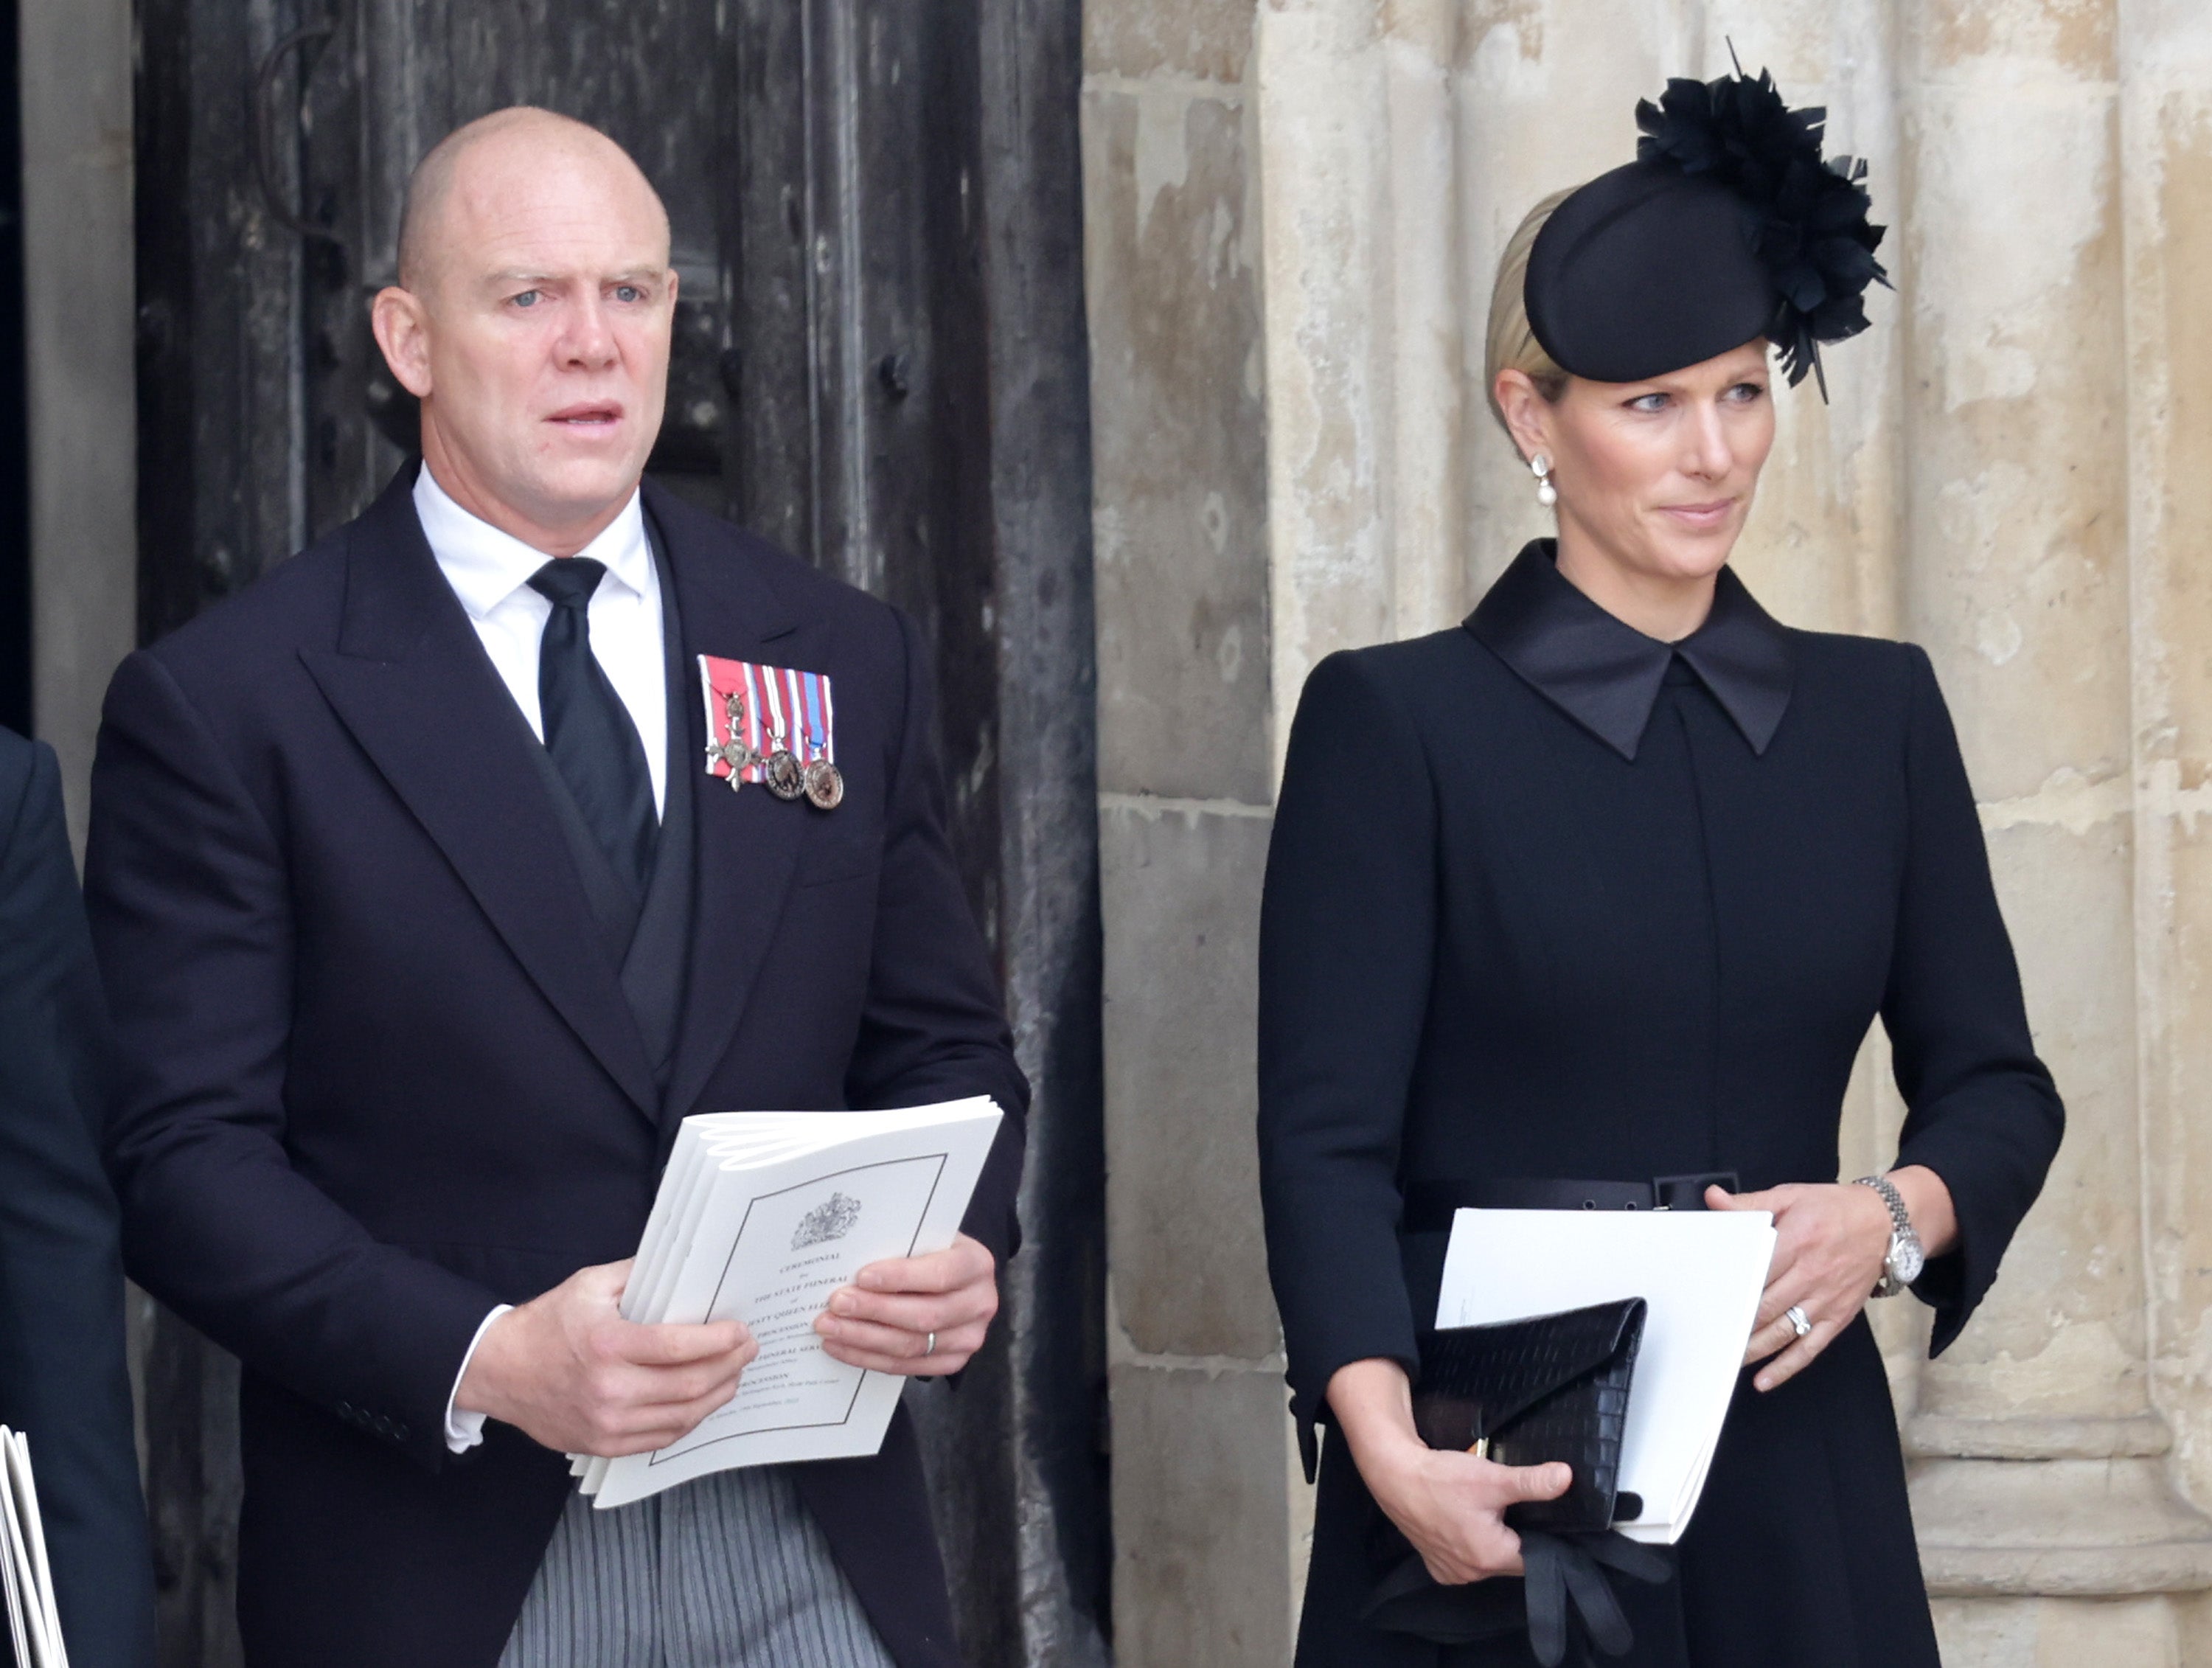 Tindall and Phillips at Queen Elizabeth’s funeral in September